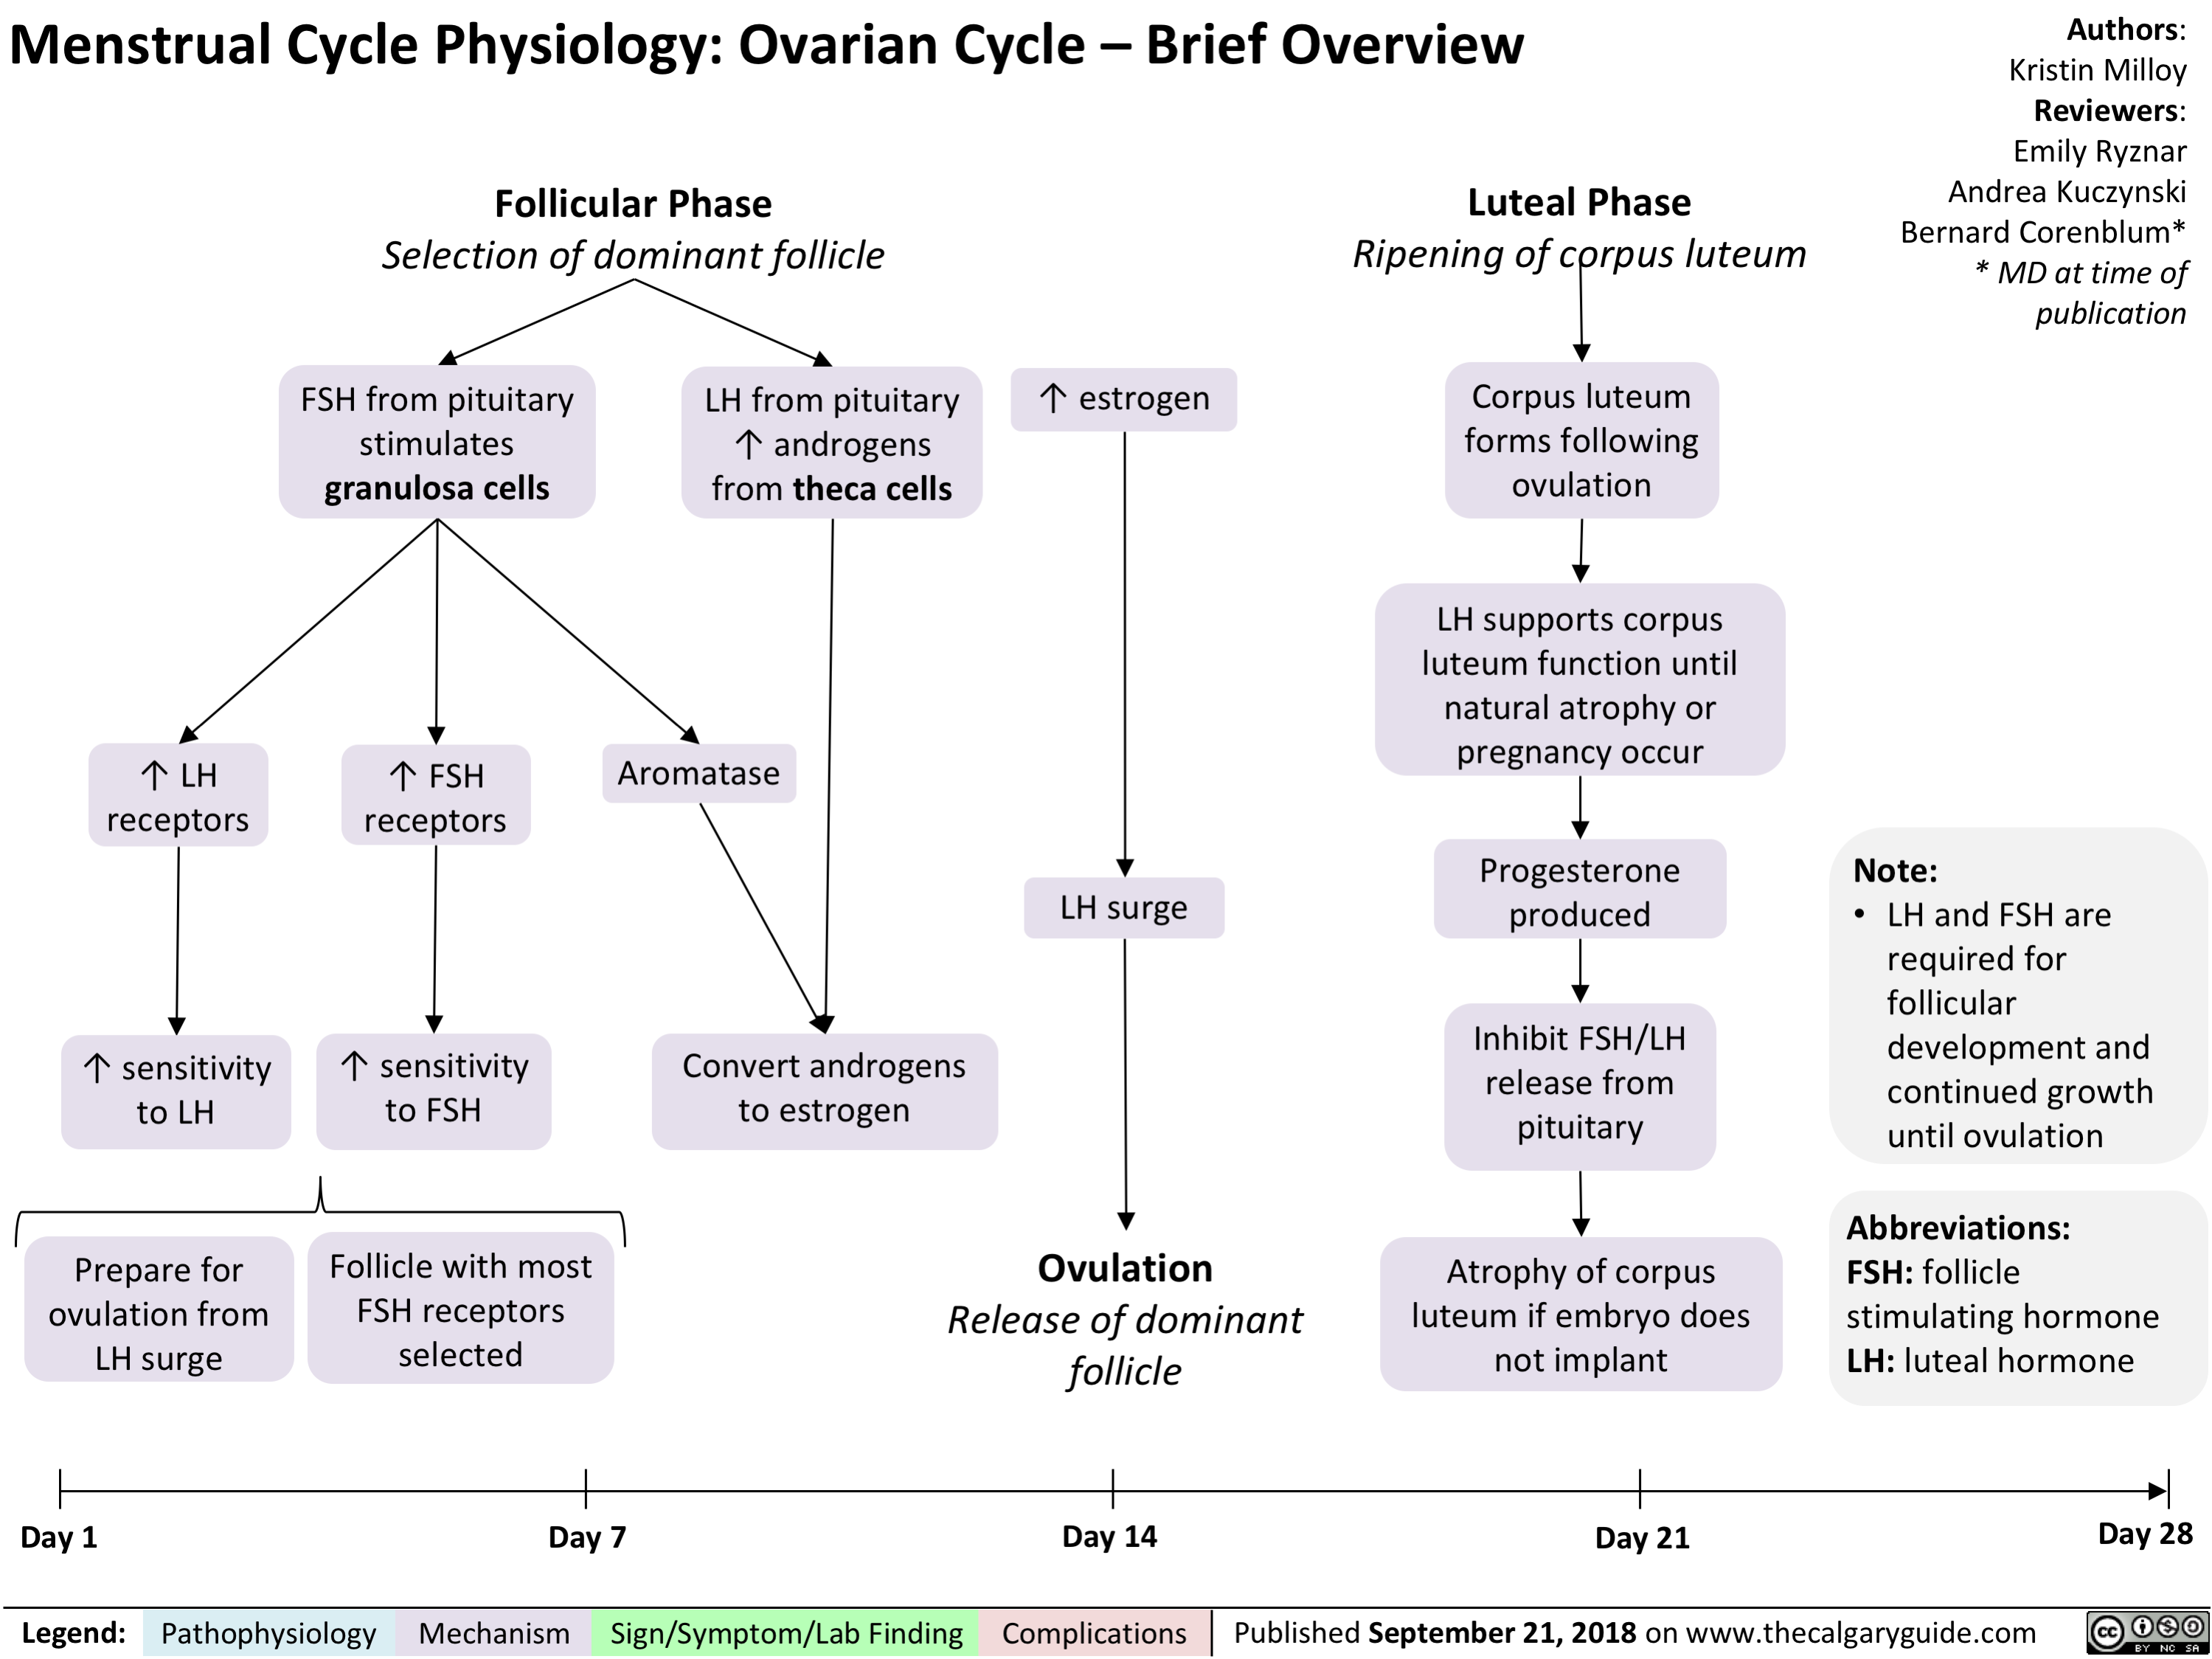 Menstrual Cycle Physiology: Ovarian Cycle – Brief Overview
Authors: Kristin Milloy Reviewers: Emily Ryznar Andrea Kuczynski Bernard Corenblum* * MD at time of publication
  Follicular Phase
Selection of dominant follicle
Luteal Phase
Ripening of corpus luteum
Corpus luteum forms following ovulation
LH supports corpus luteum function until natural atrophy or pregnancy occur
Progesterone produced
Inhibit FSH/LH release from pituitary
Atrophy of corpus luteum if embryo does not implant
     FSH from pituitary stimulates granulosa cells
↑ FSH receptors
↑ sensitivity to FSH
Follicle with most FSH receptors selected
LH from pituitary ↑ androgens from theca cells
Aromatase
↑ estrogen
         ↑ LH receptors
↑ sensitivity to LH
Prepare for ovulation from LH surge
LH surge
Note:
• LHandFSHare required for follicular development and continued growth until ovulation
Abbreviations:
FSH: follicle stimulating hormone LH: luteal hormone
            Convert androgens to estrogen
       Ovulation
Release of dominant follicle
      Day 1
Day 7
Day 14
Day 21
Day 28
 Legend:
 Pathophysiology
Mechanism
 Sign/Symptom/Lab Finding
  Complications
 Published September 21, 2018 on www.thecalgaryguide.com
  